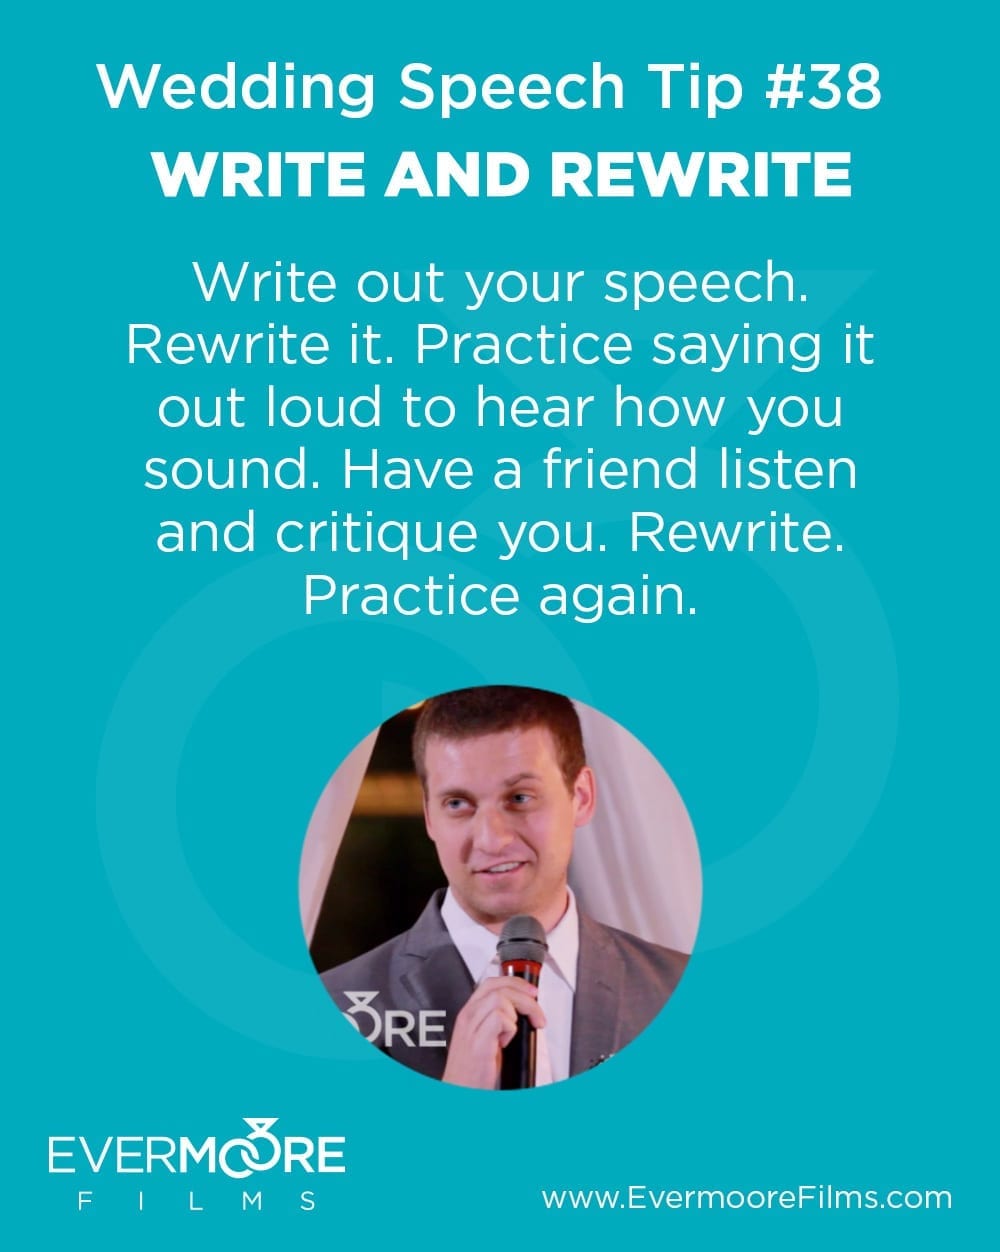 Write And Rewrite | Wedding Speech Tip #38 | Evermoore Films | Write out your speech. Rewrite it. Practice saying it out loud to hear how you sound. Have a friend listen and critique you. Rewrite. Practice again.